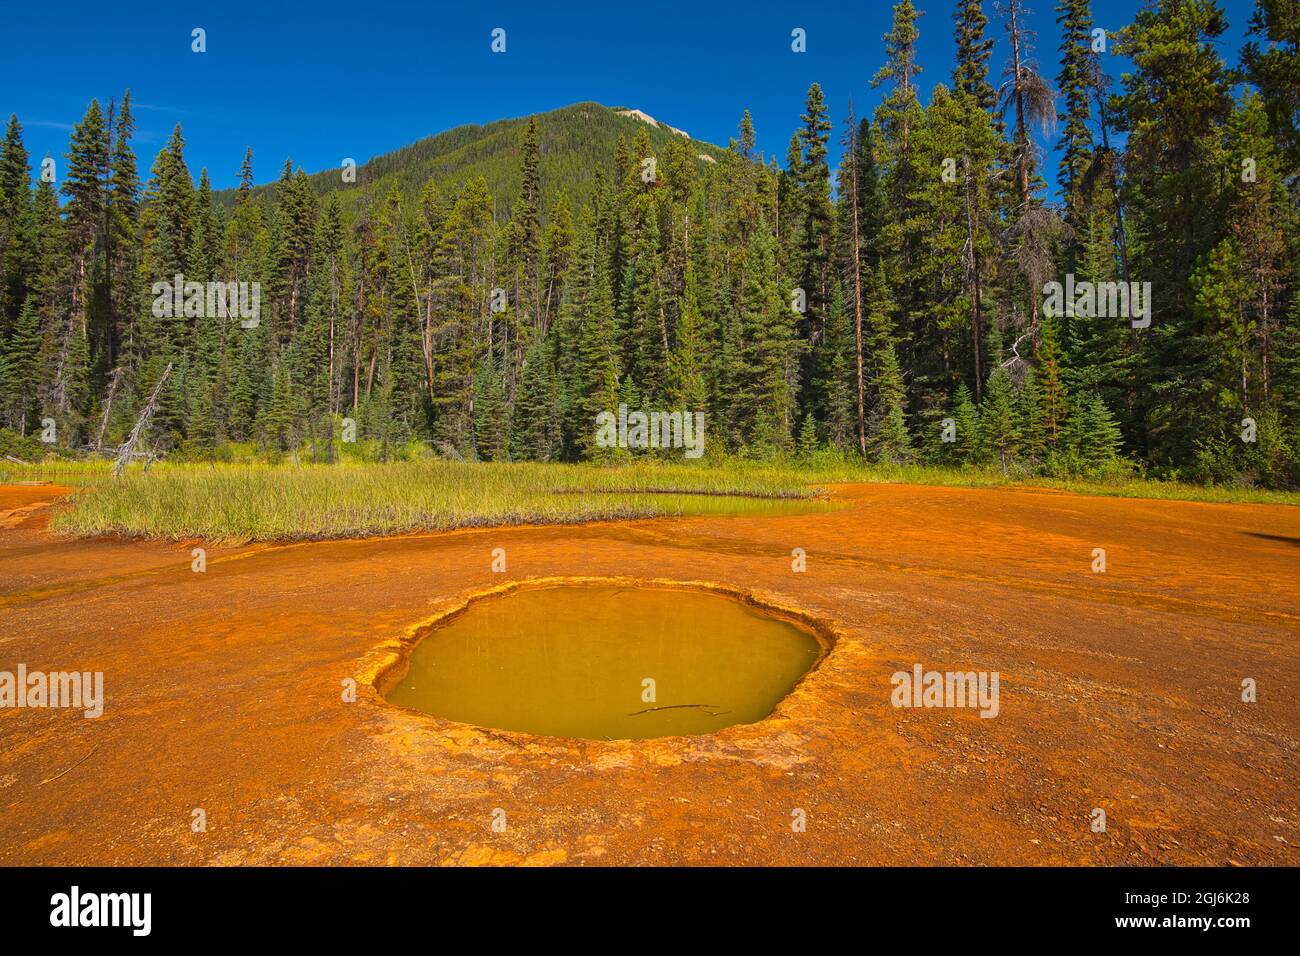 Canada, British Columbia, Kootenay National Park. Iron-rich Paint Pots mineral springs stain ground. Credit as: Mike Grandmaison / Jaynes Gallery / Da Stock Photo